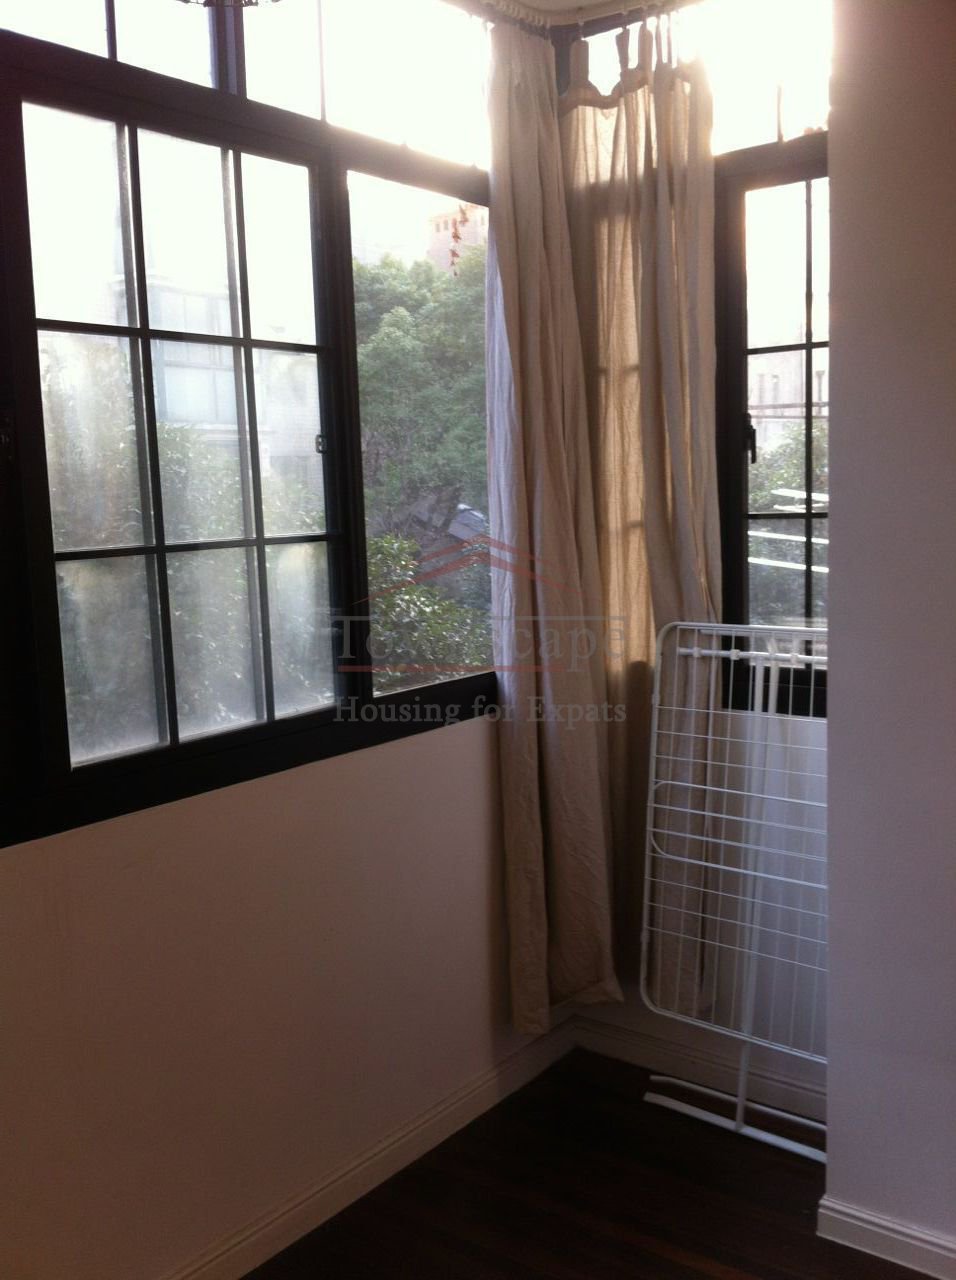 Rent in shanghai Stylish 1 BR Lane house in Former Colonial Shanghai L1/7/9